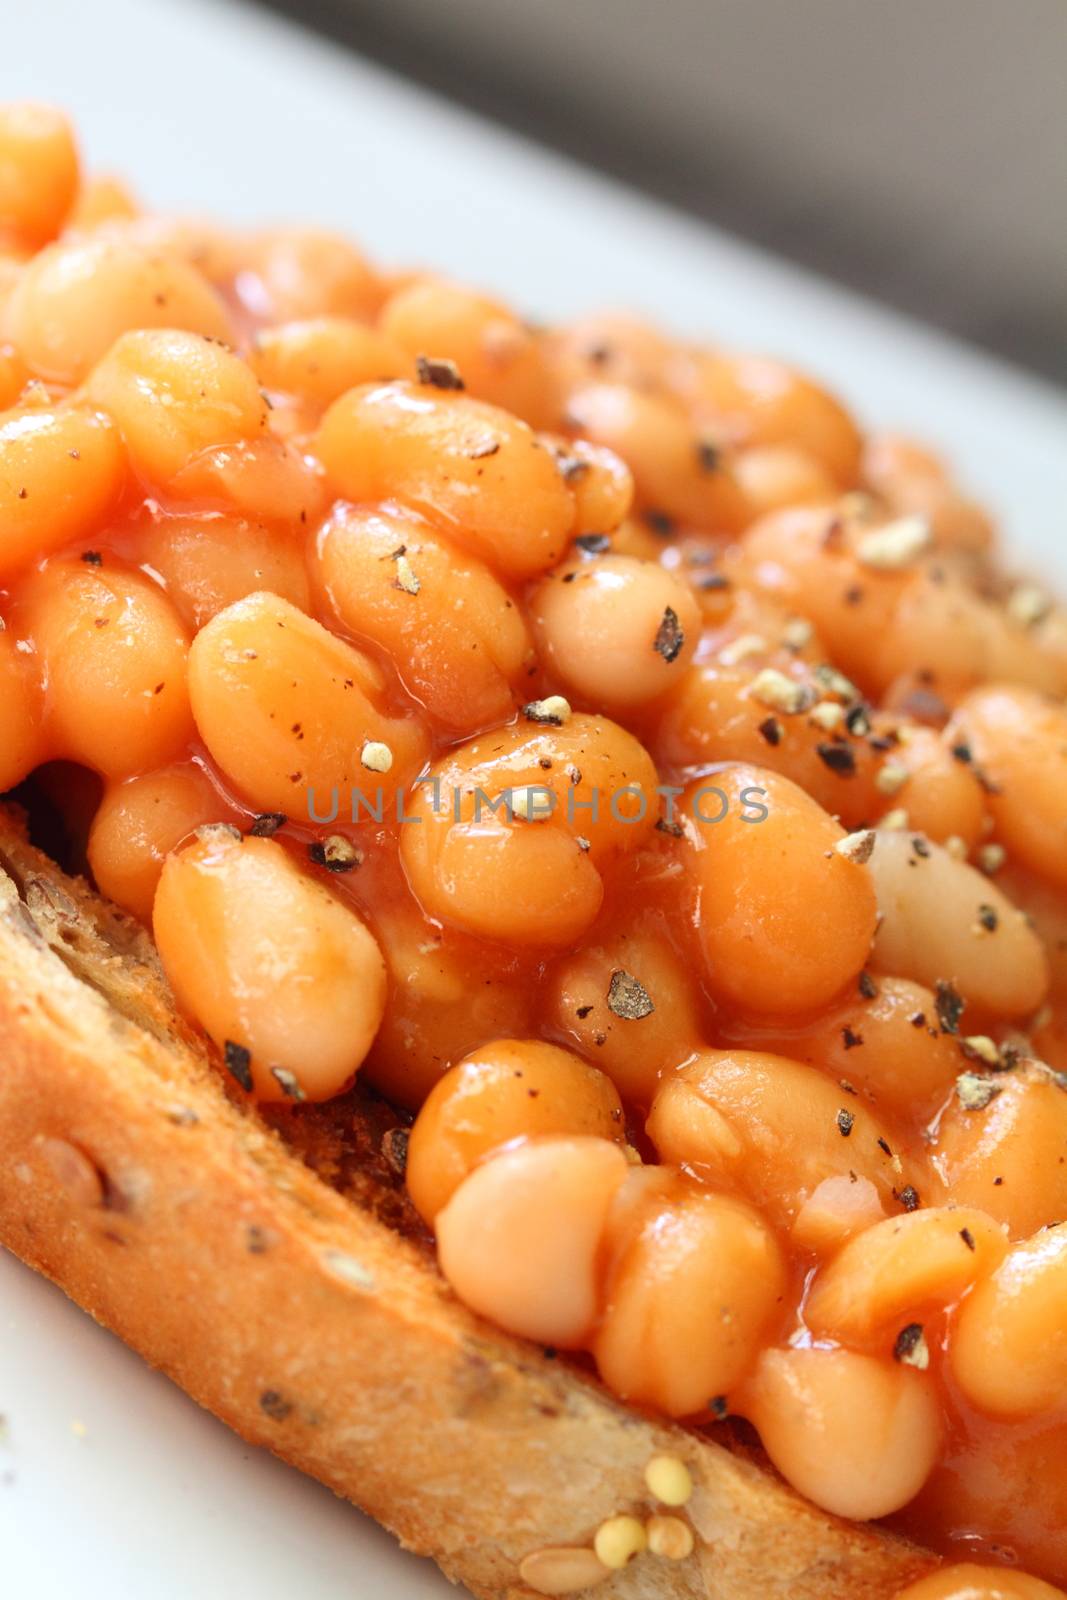 baked beans on toast with ground black pepper by mitzy